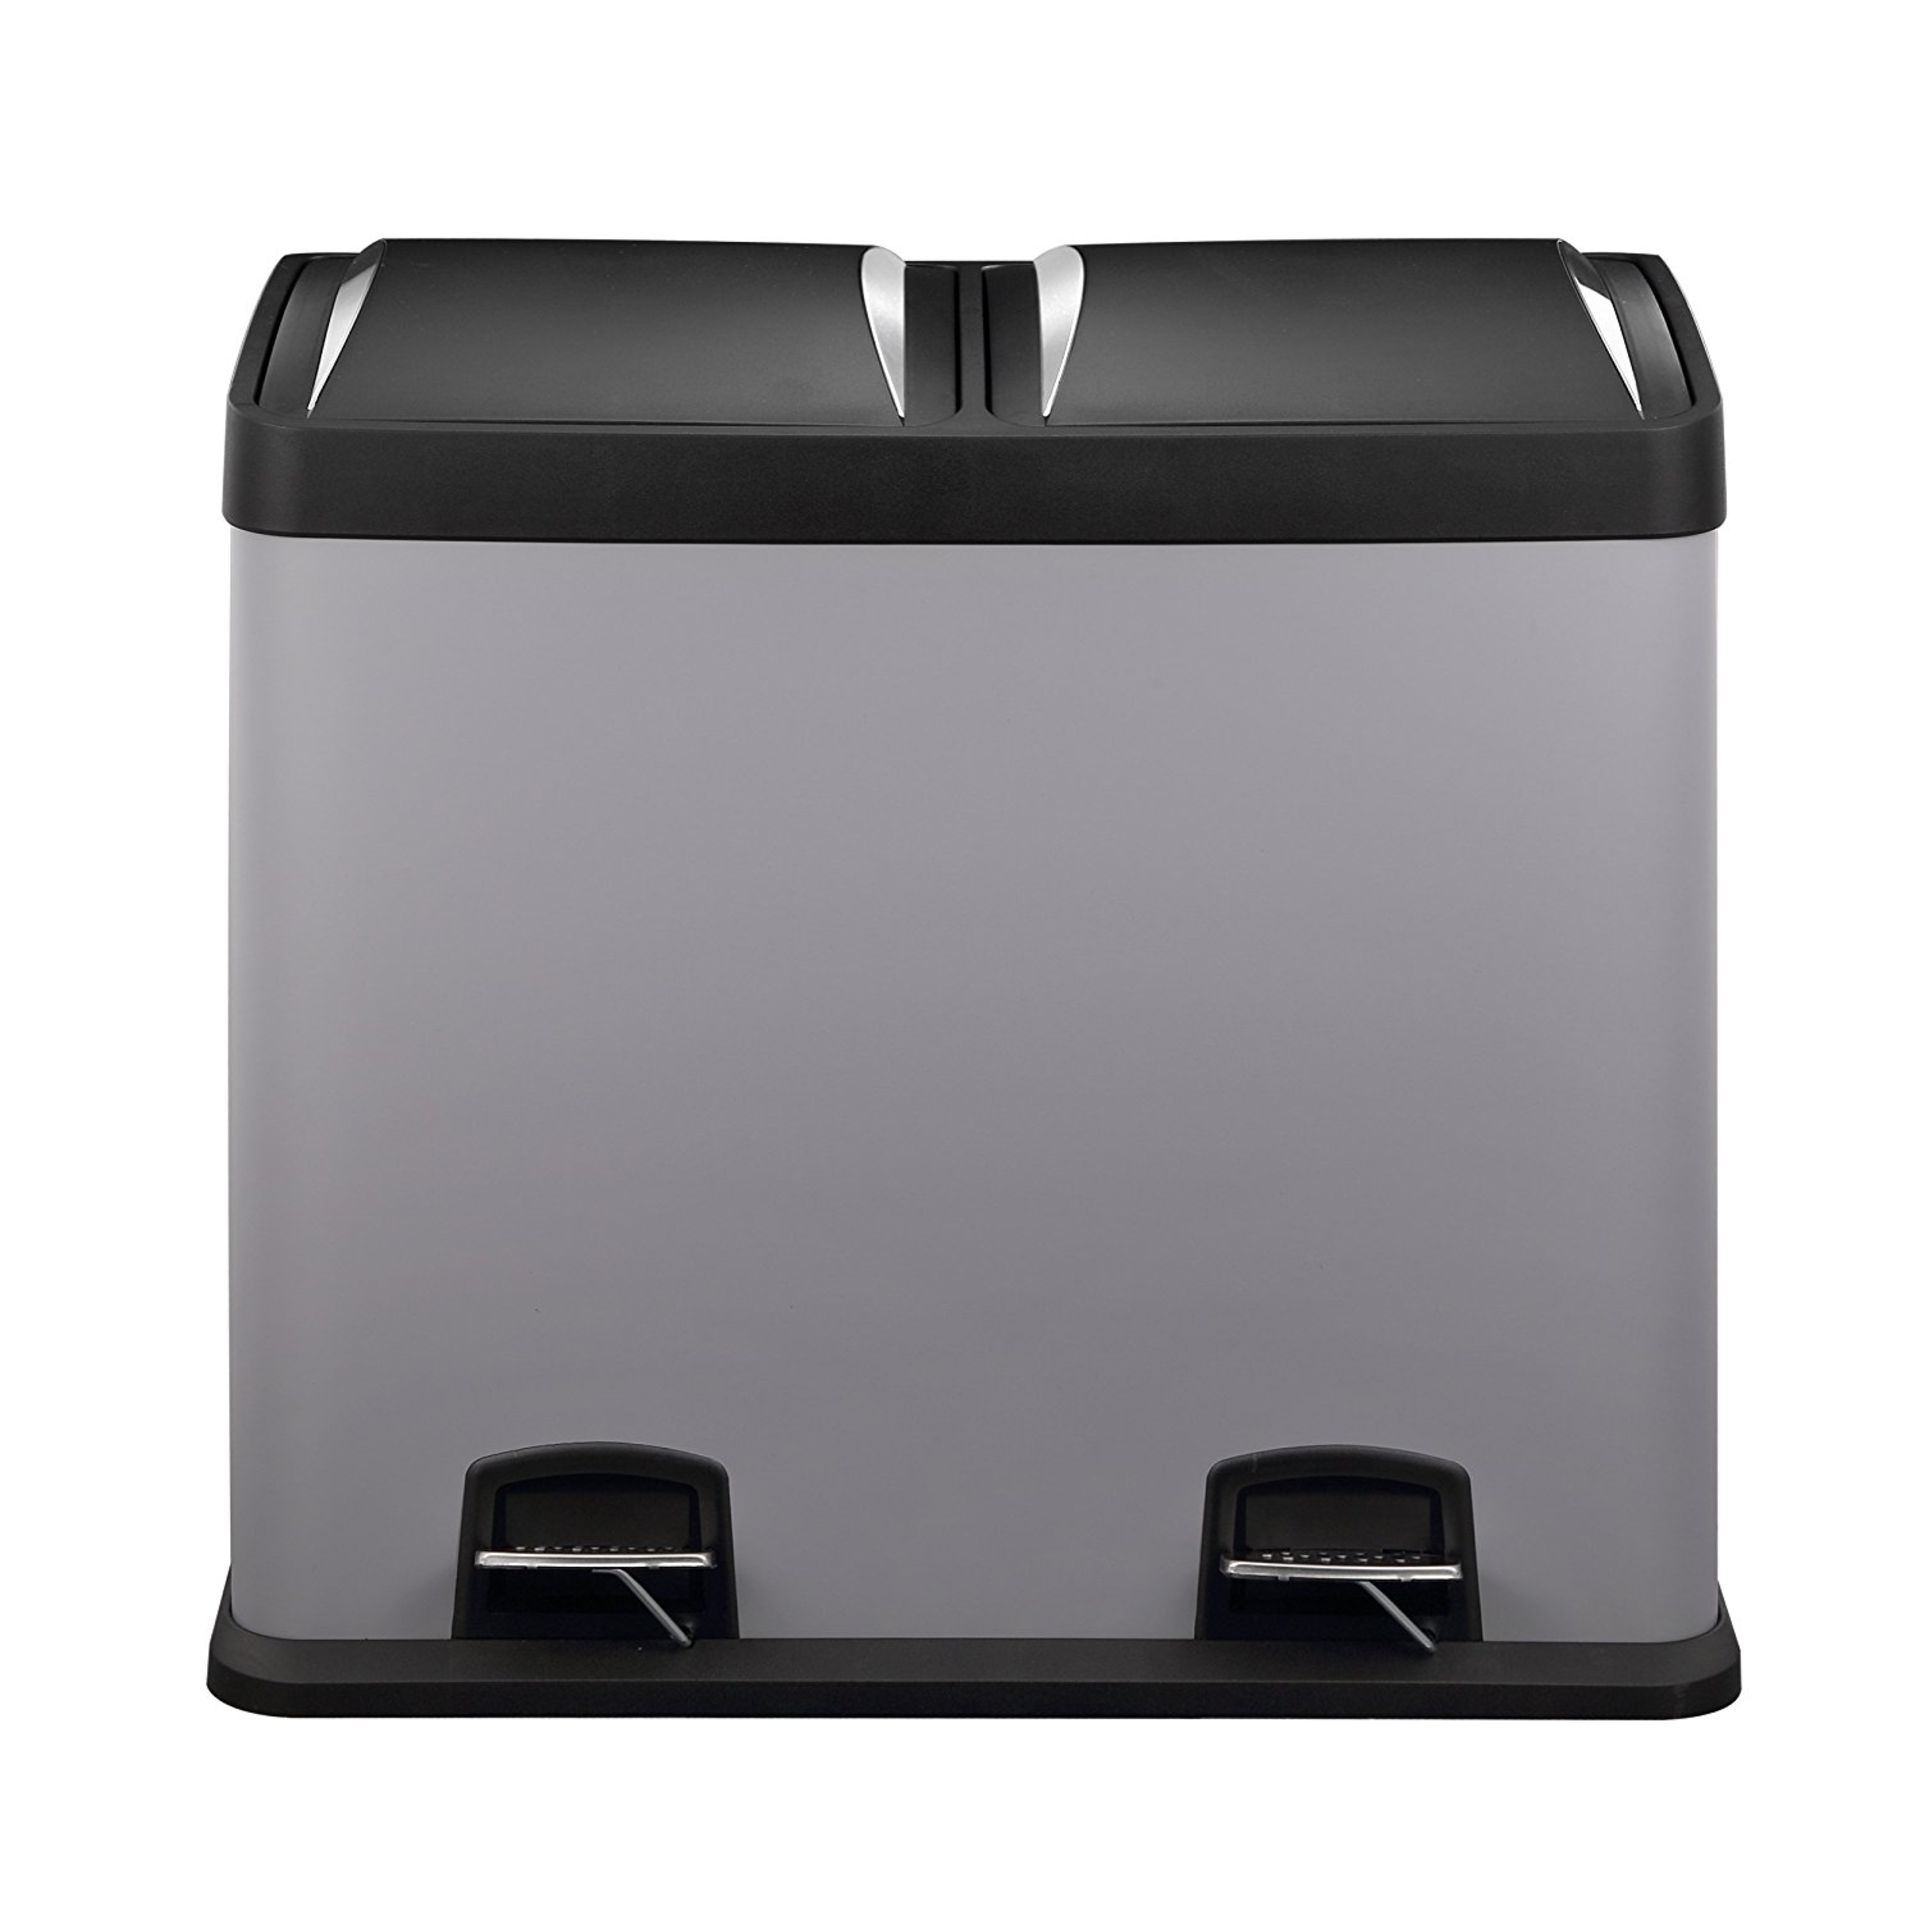 Mari Home - Cool Grey 48 Litre Steel 2 in 1 Waste Separation, Foot Pedal Recycle Rubbish Bin RRP £